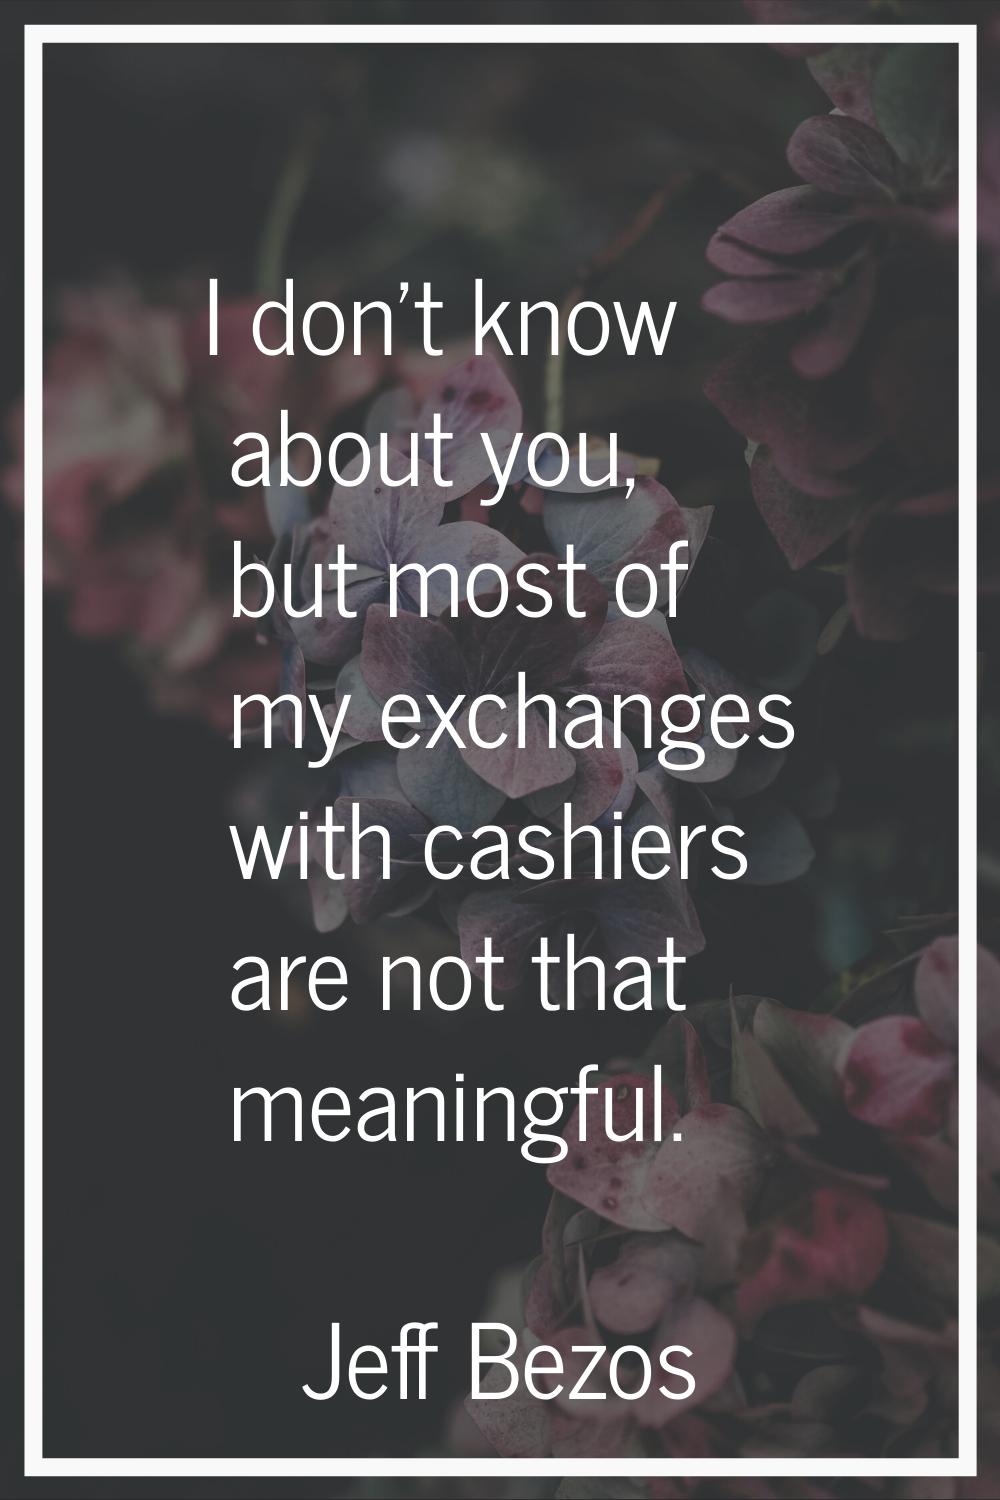 I don't know about you, but most of my exchanges with cashiers are not that meaningful.